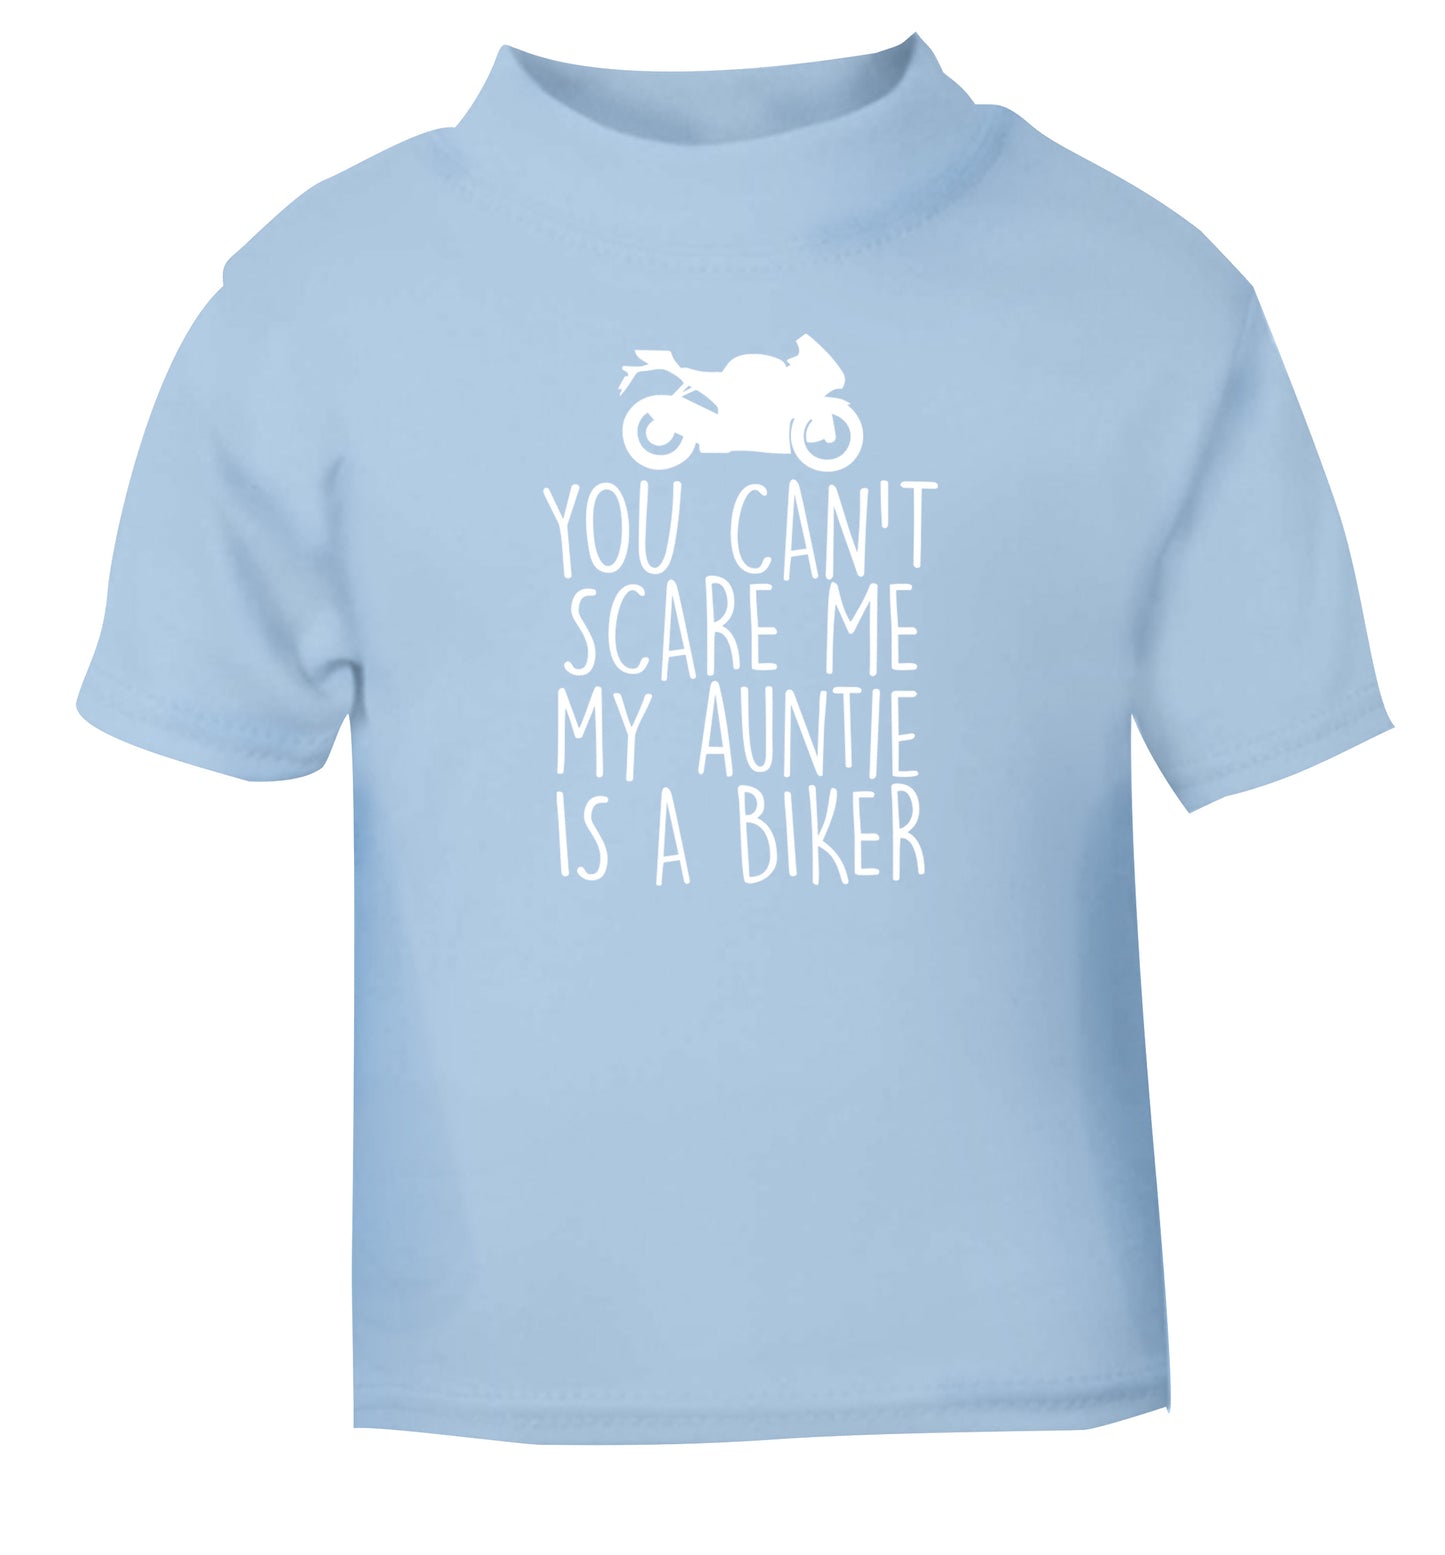 You can't scare me my auntie is a biker light blue Baby Toddler Tshirt 2 Years